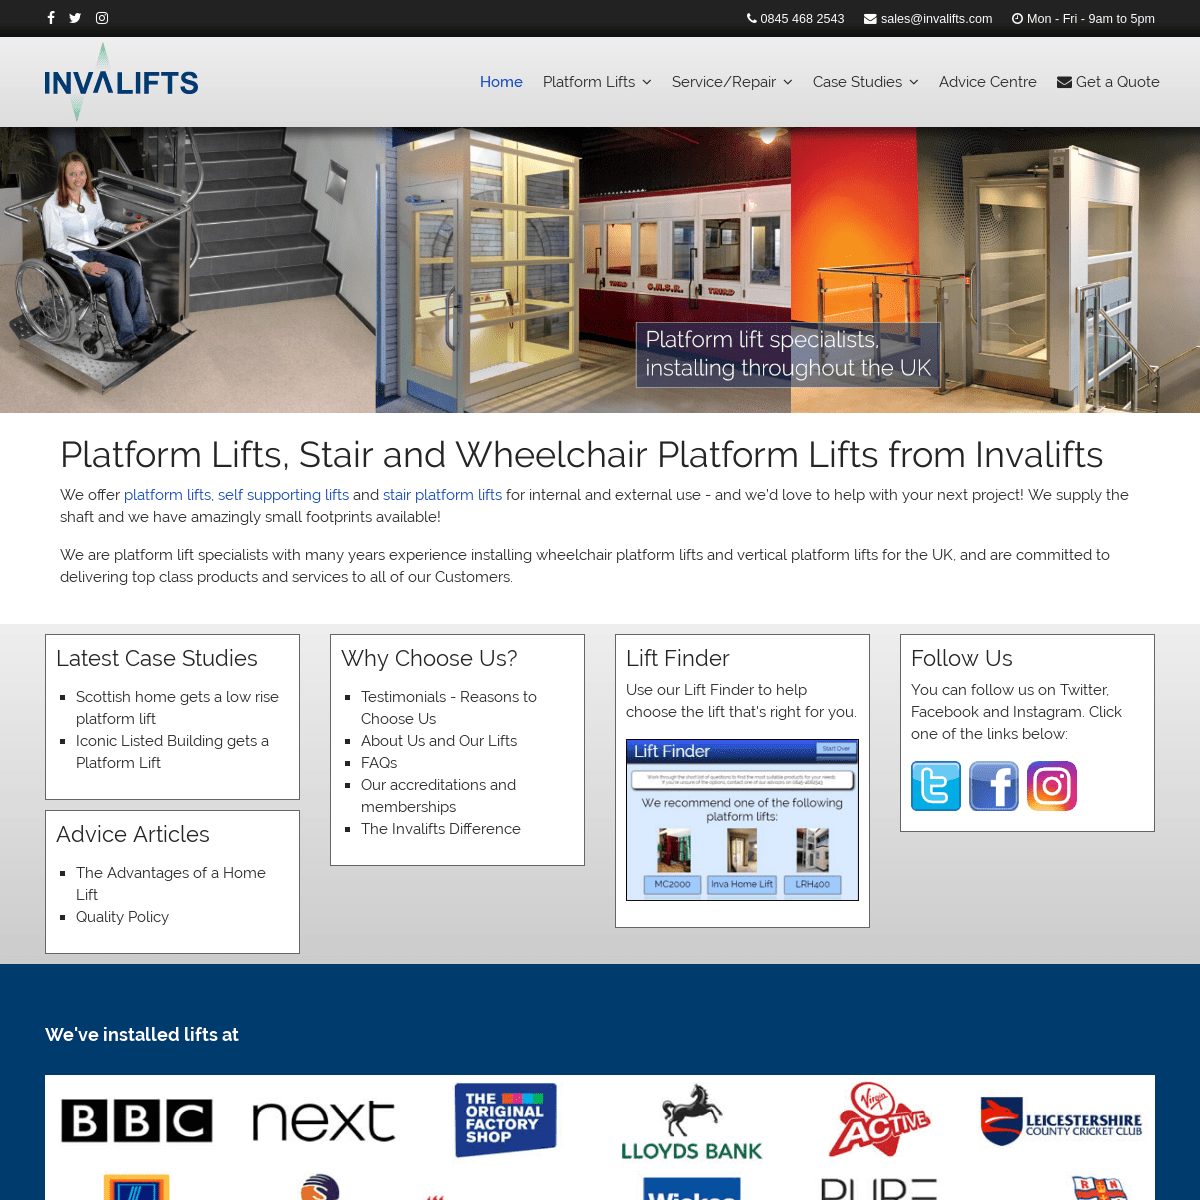 Platform lifts and wheelchair platform lifts from Invalifts